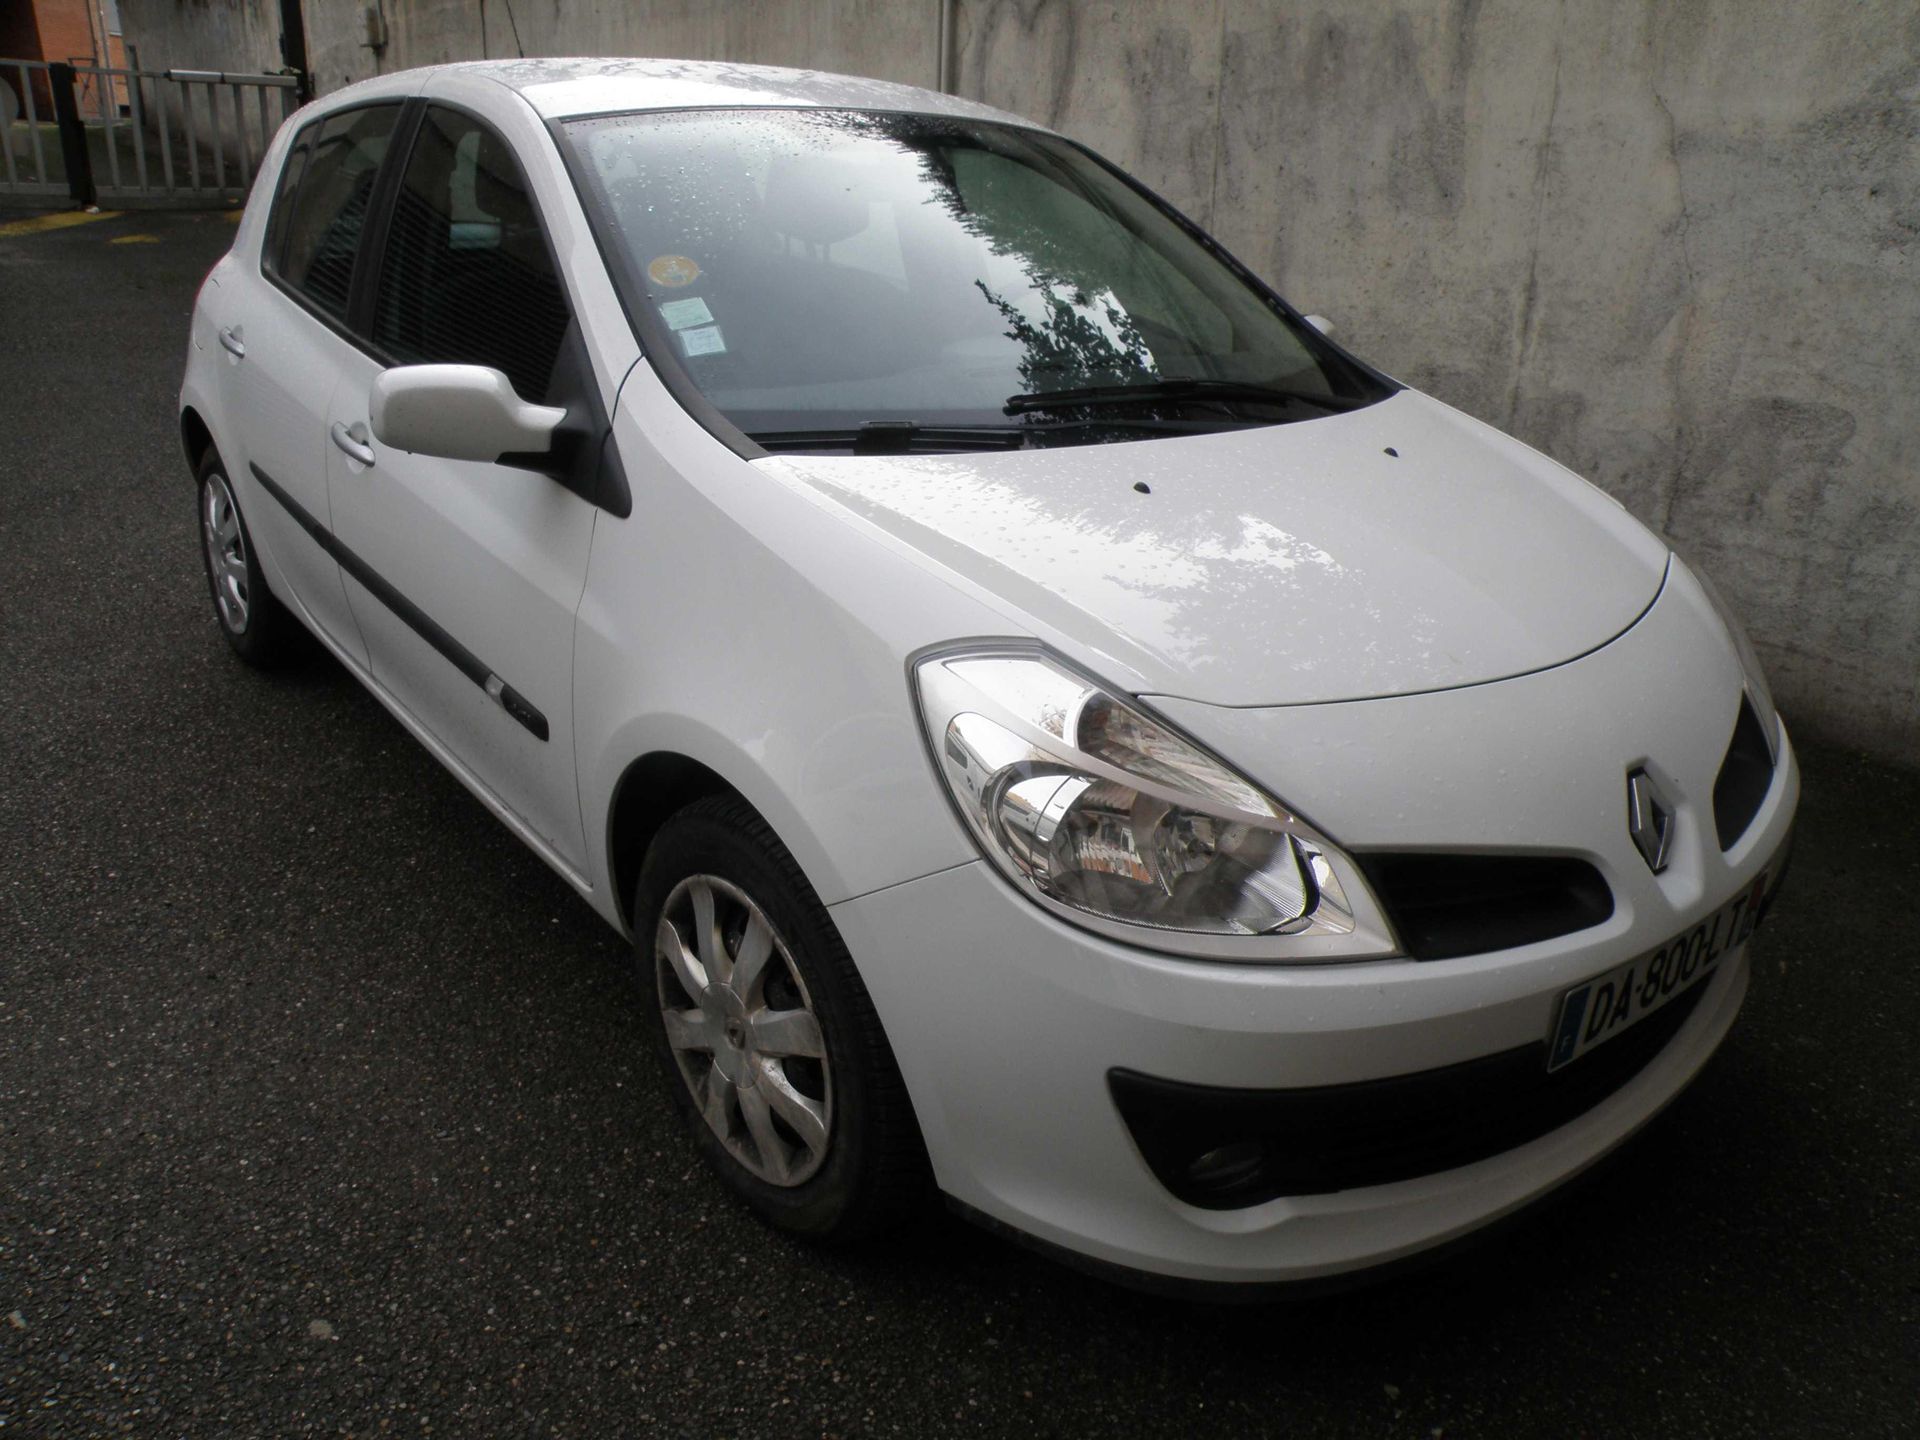 Null [RP] Lot reserved for car professionals.
RENAULT Clio III 1.5 dCi 86cv, Gaz&hellip;